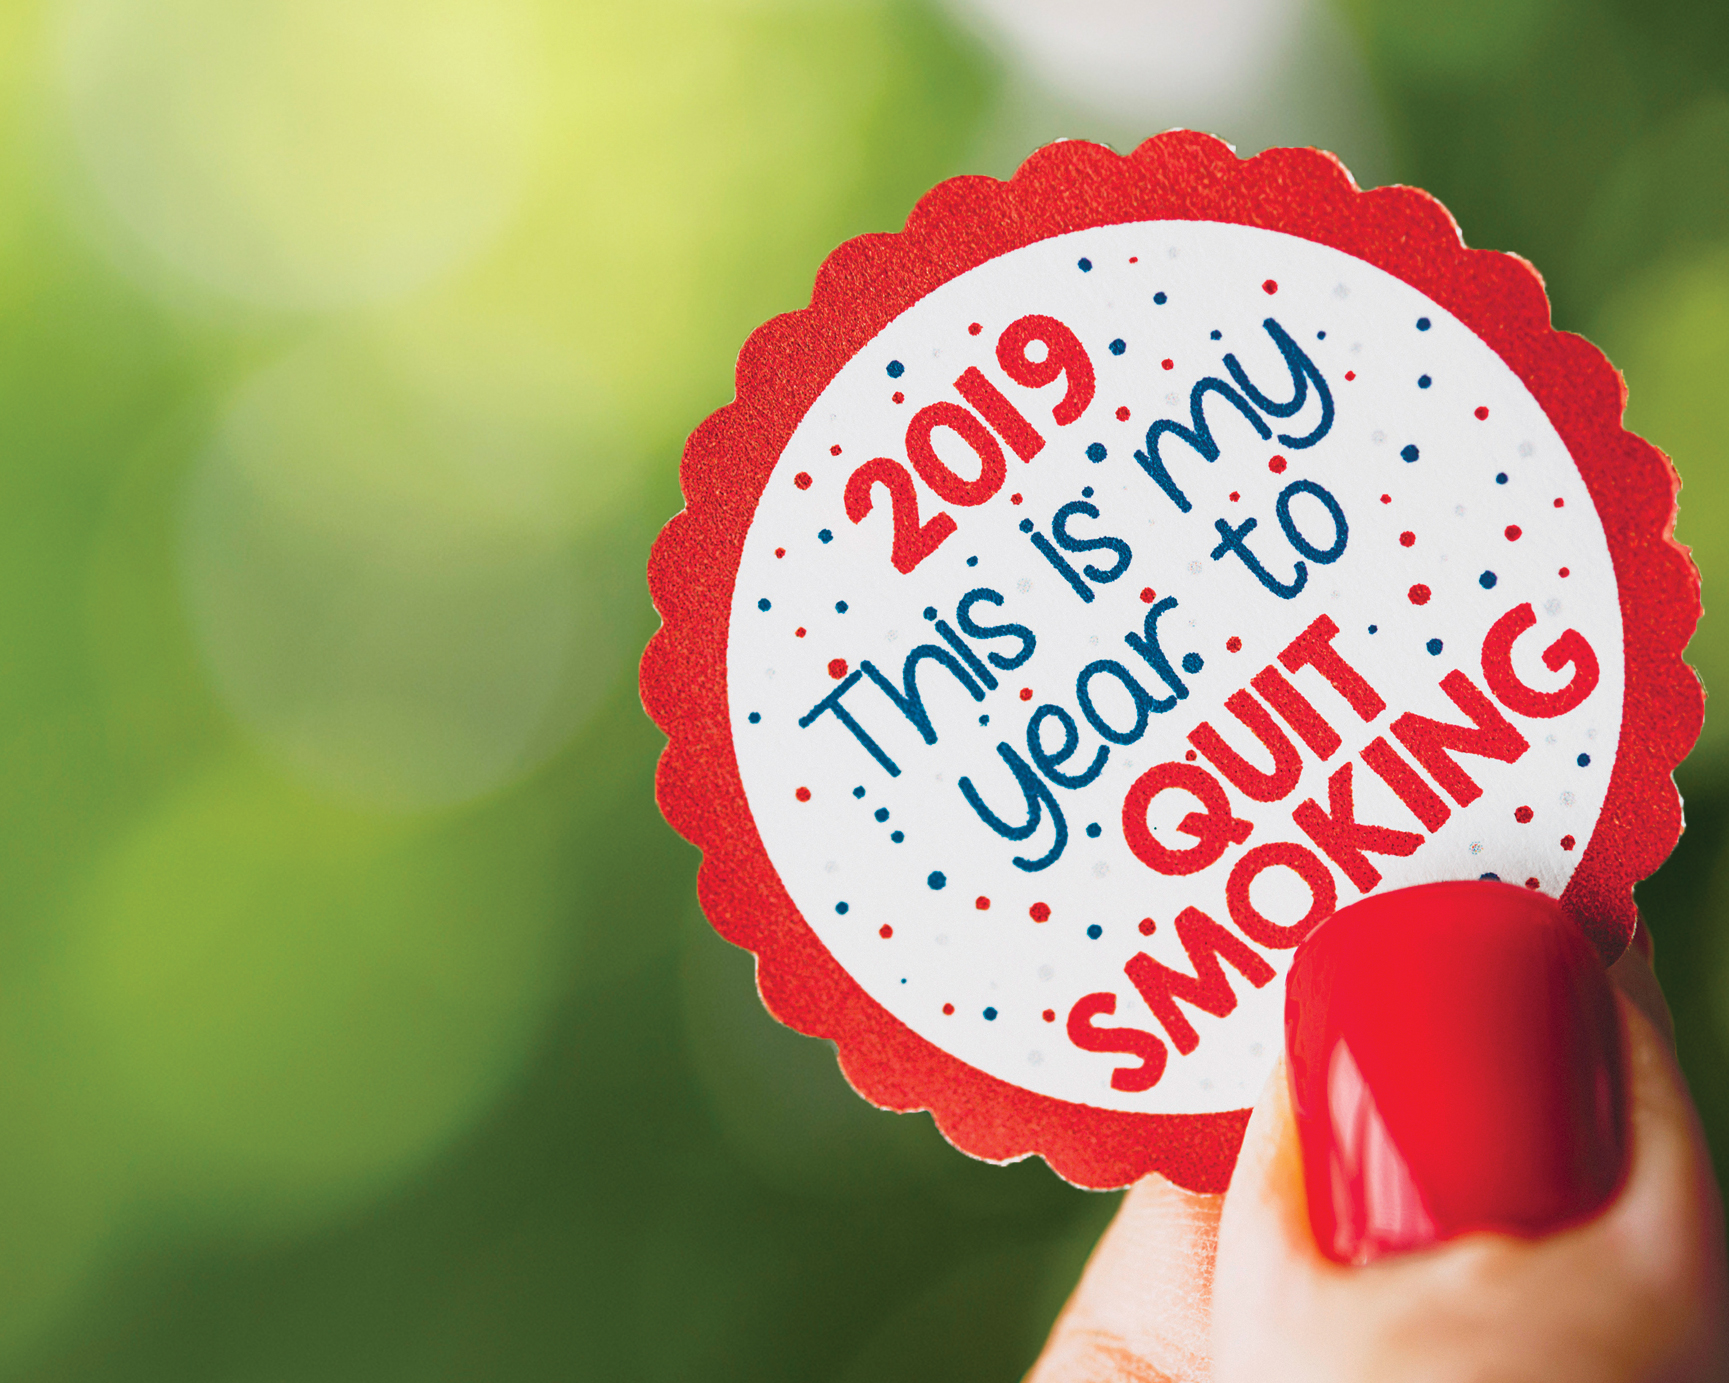 Quit Smoking and Make This Your Best Year Yet